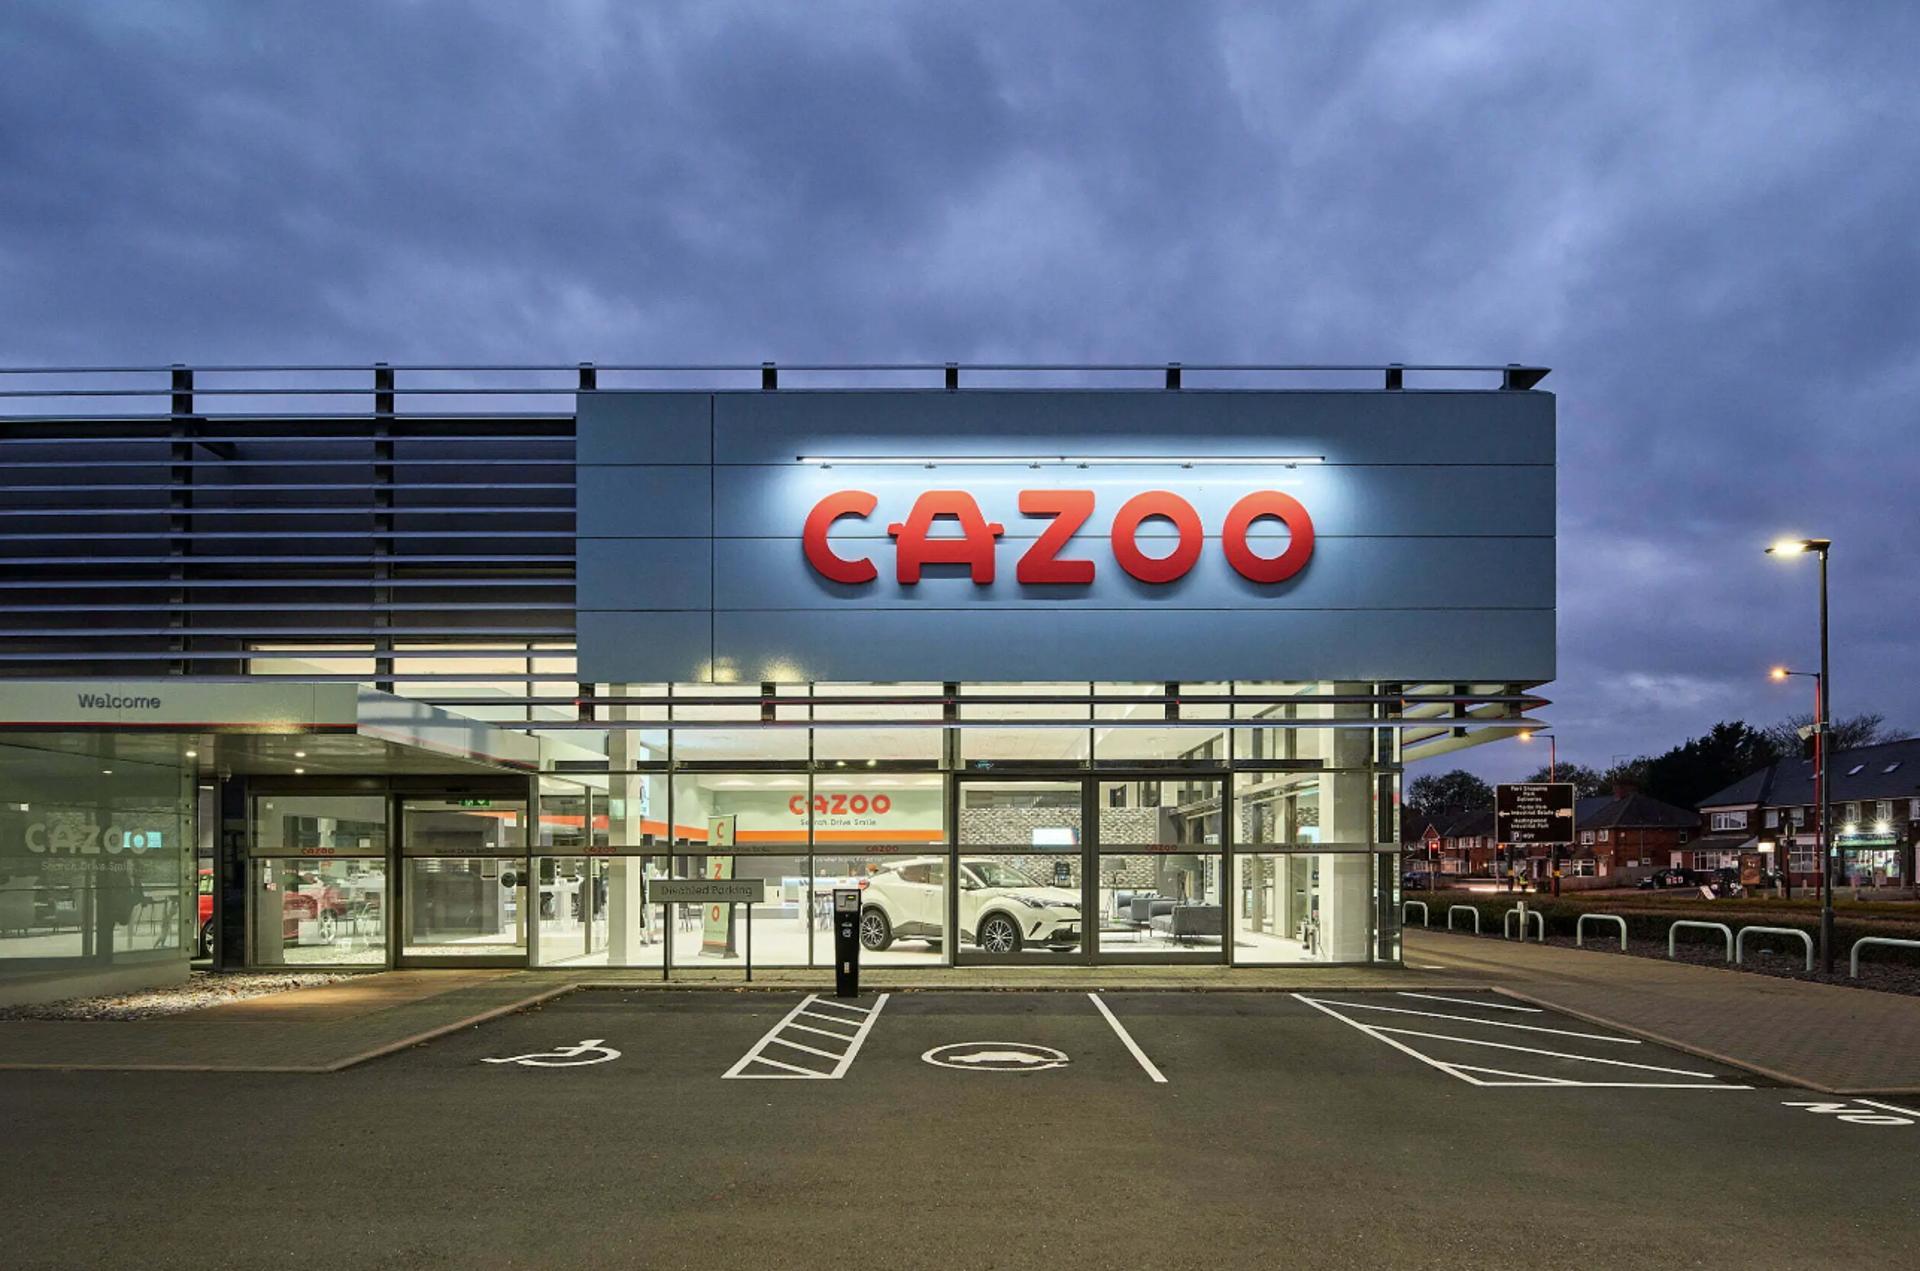 Cazoo’s struggles: Self-inflicted? Or a warning to the used car sector?